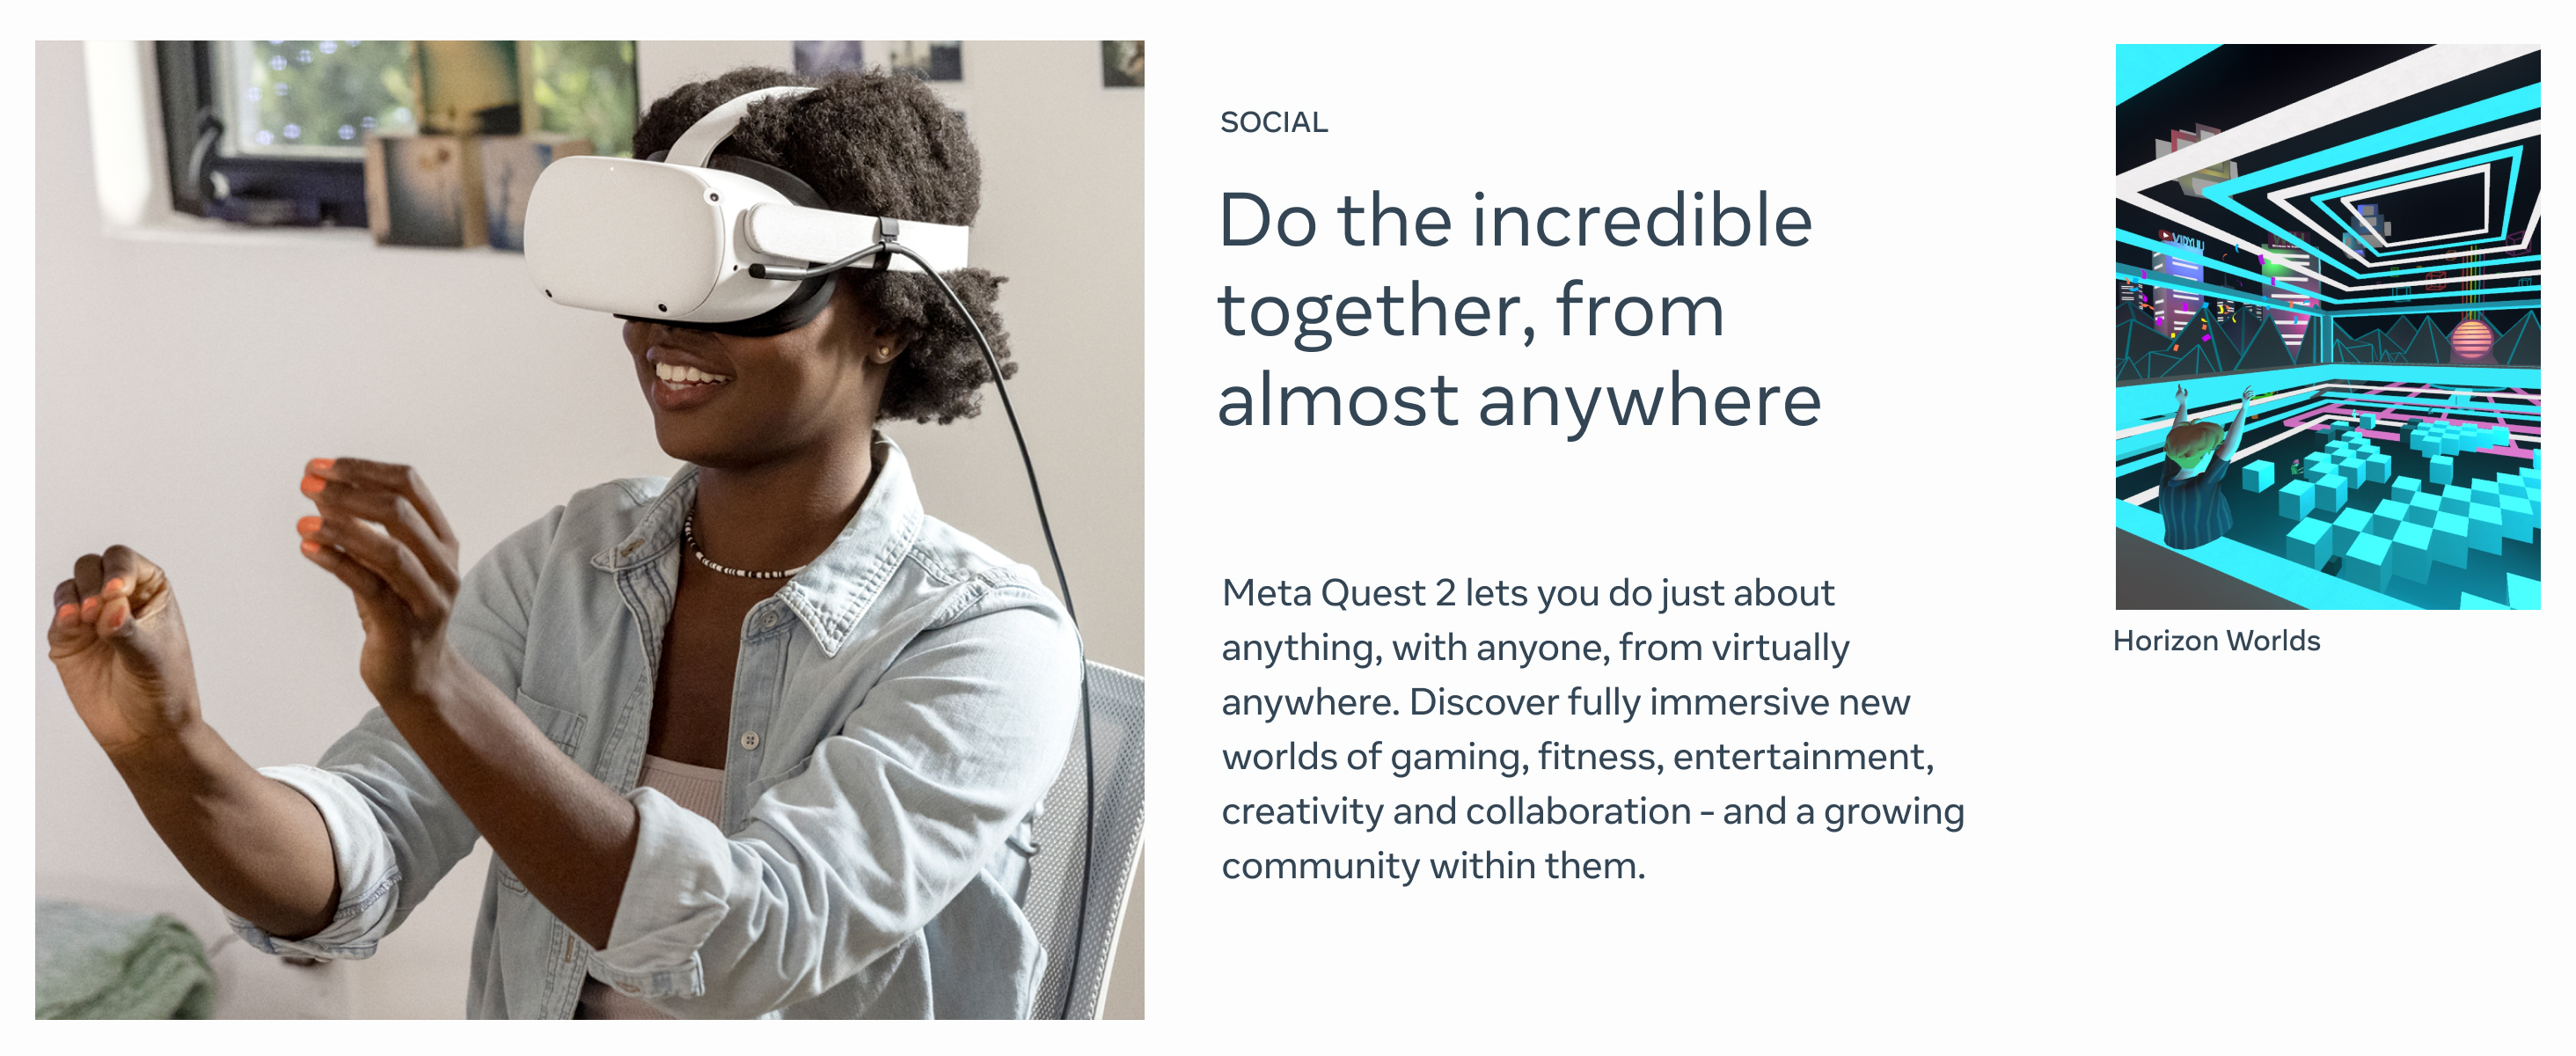 Meta Quest 2 Advanced All-in-One VR Headset (128GB) 899-00182-02